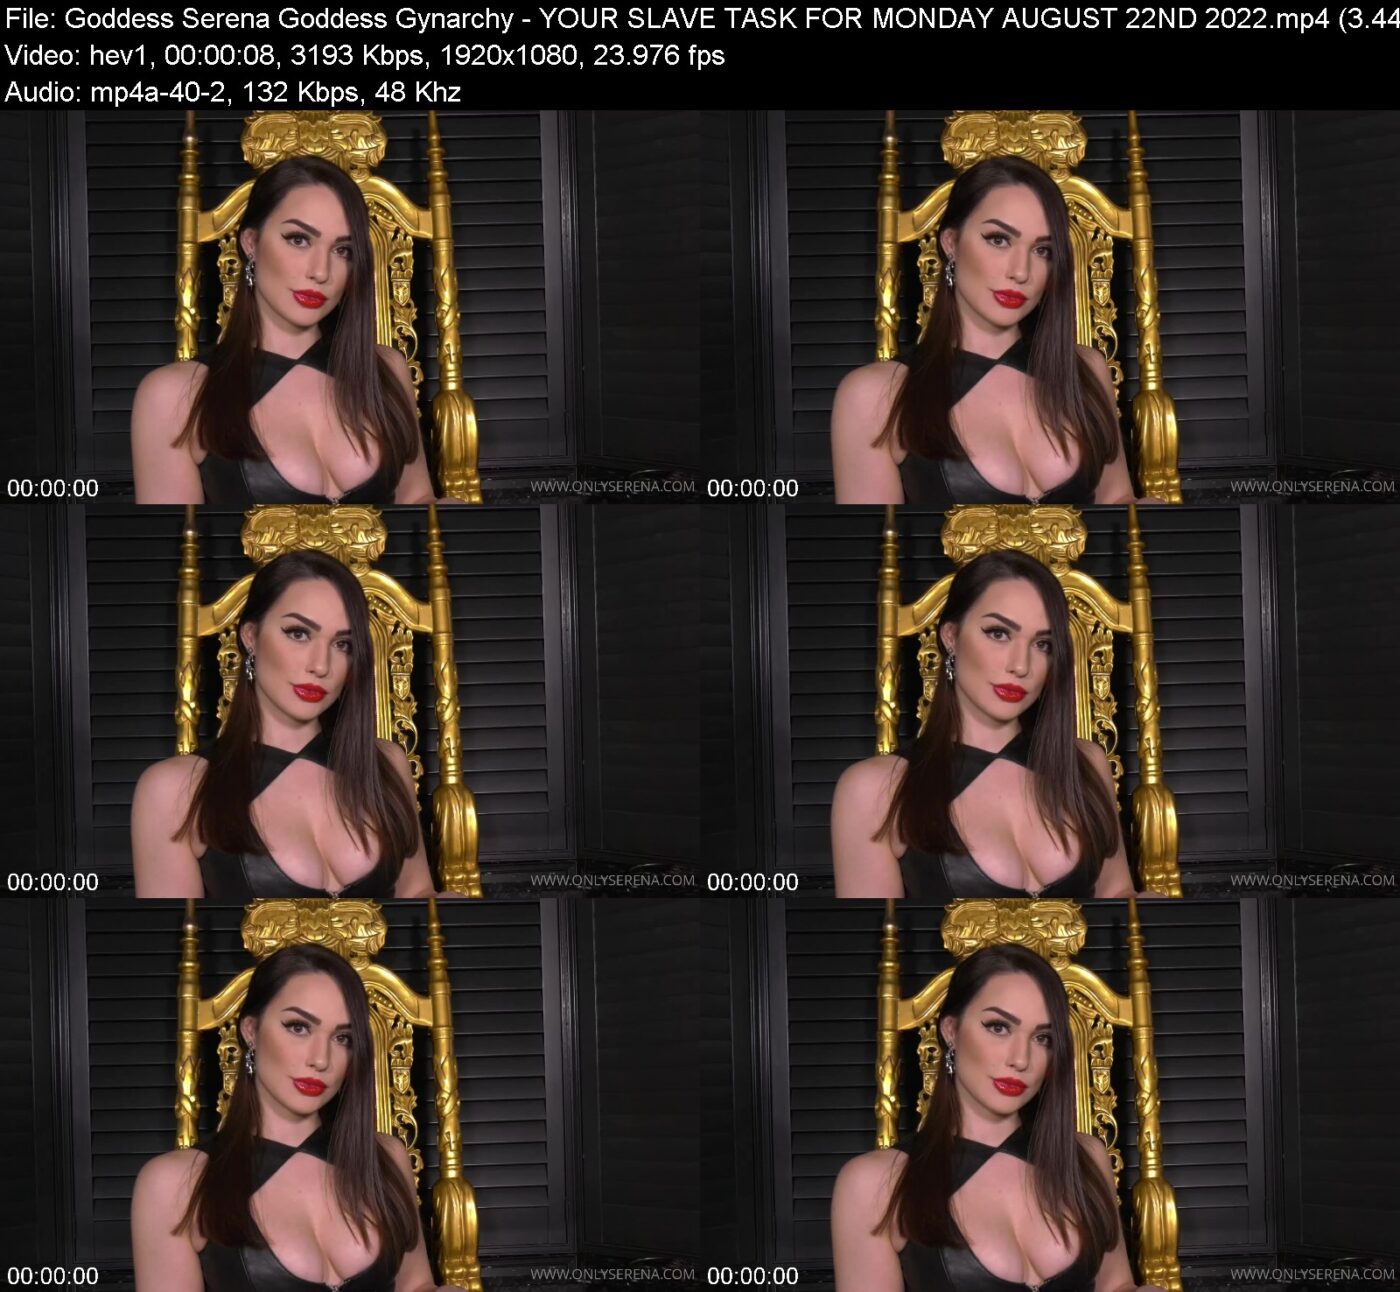 Actress: Goddess Serena Goddess Gynarchy. Title and Studio: YOUR SLAVE TASK FOR MONDAY AUGUST 22ND 2022